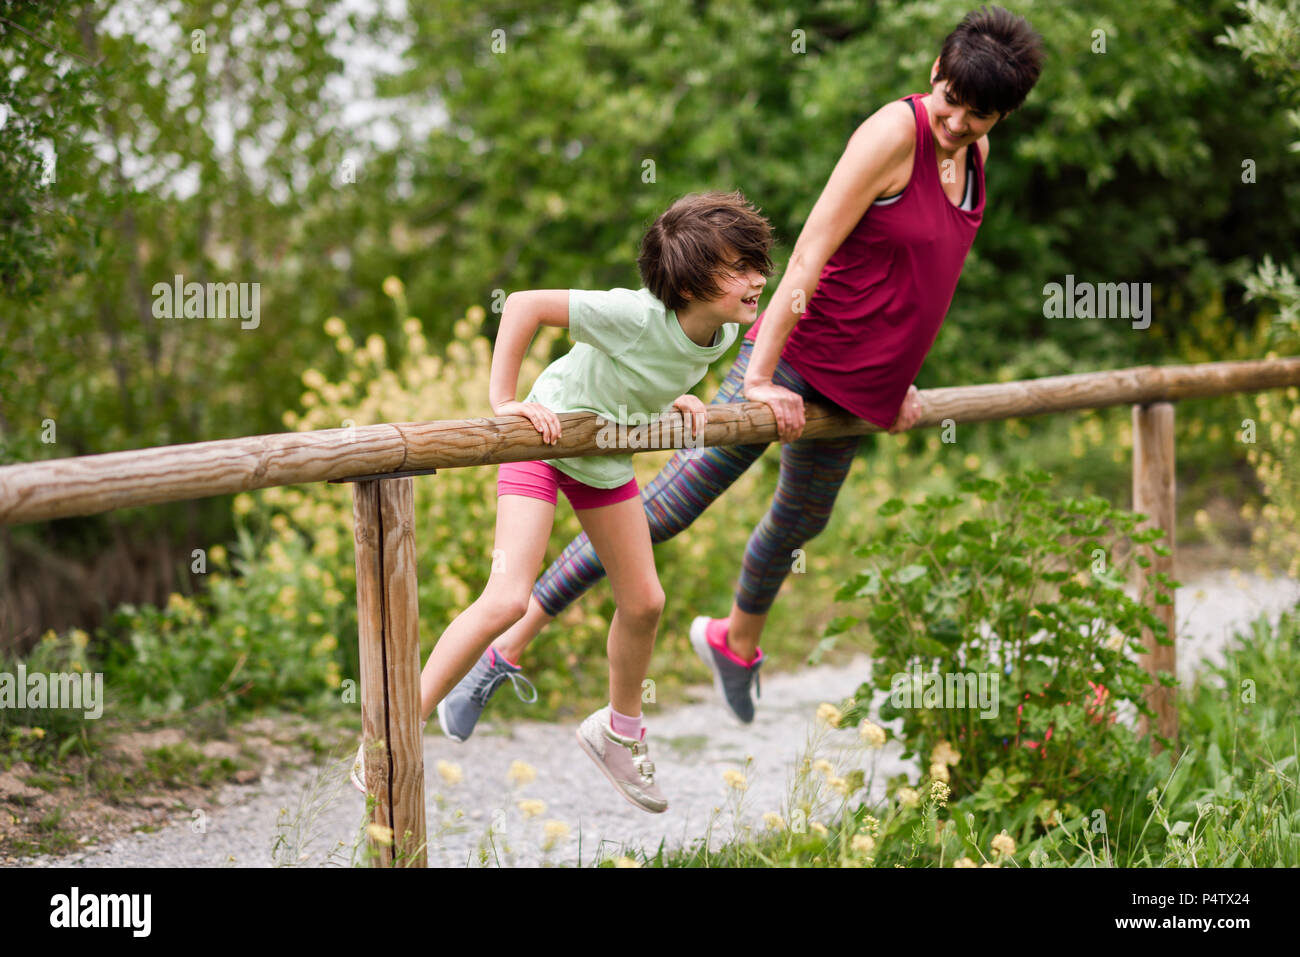 Mother and daughter having fun in nature enviroment Stock Photo